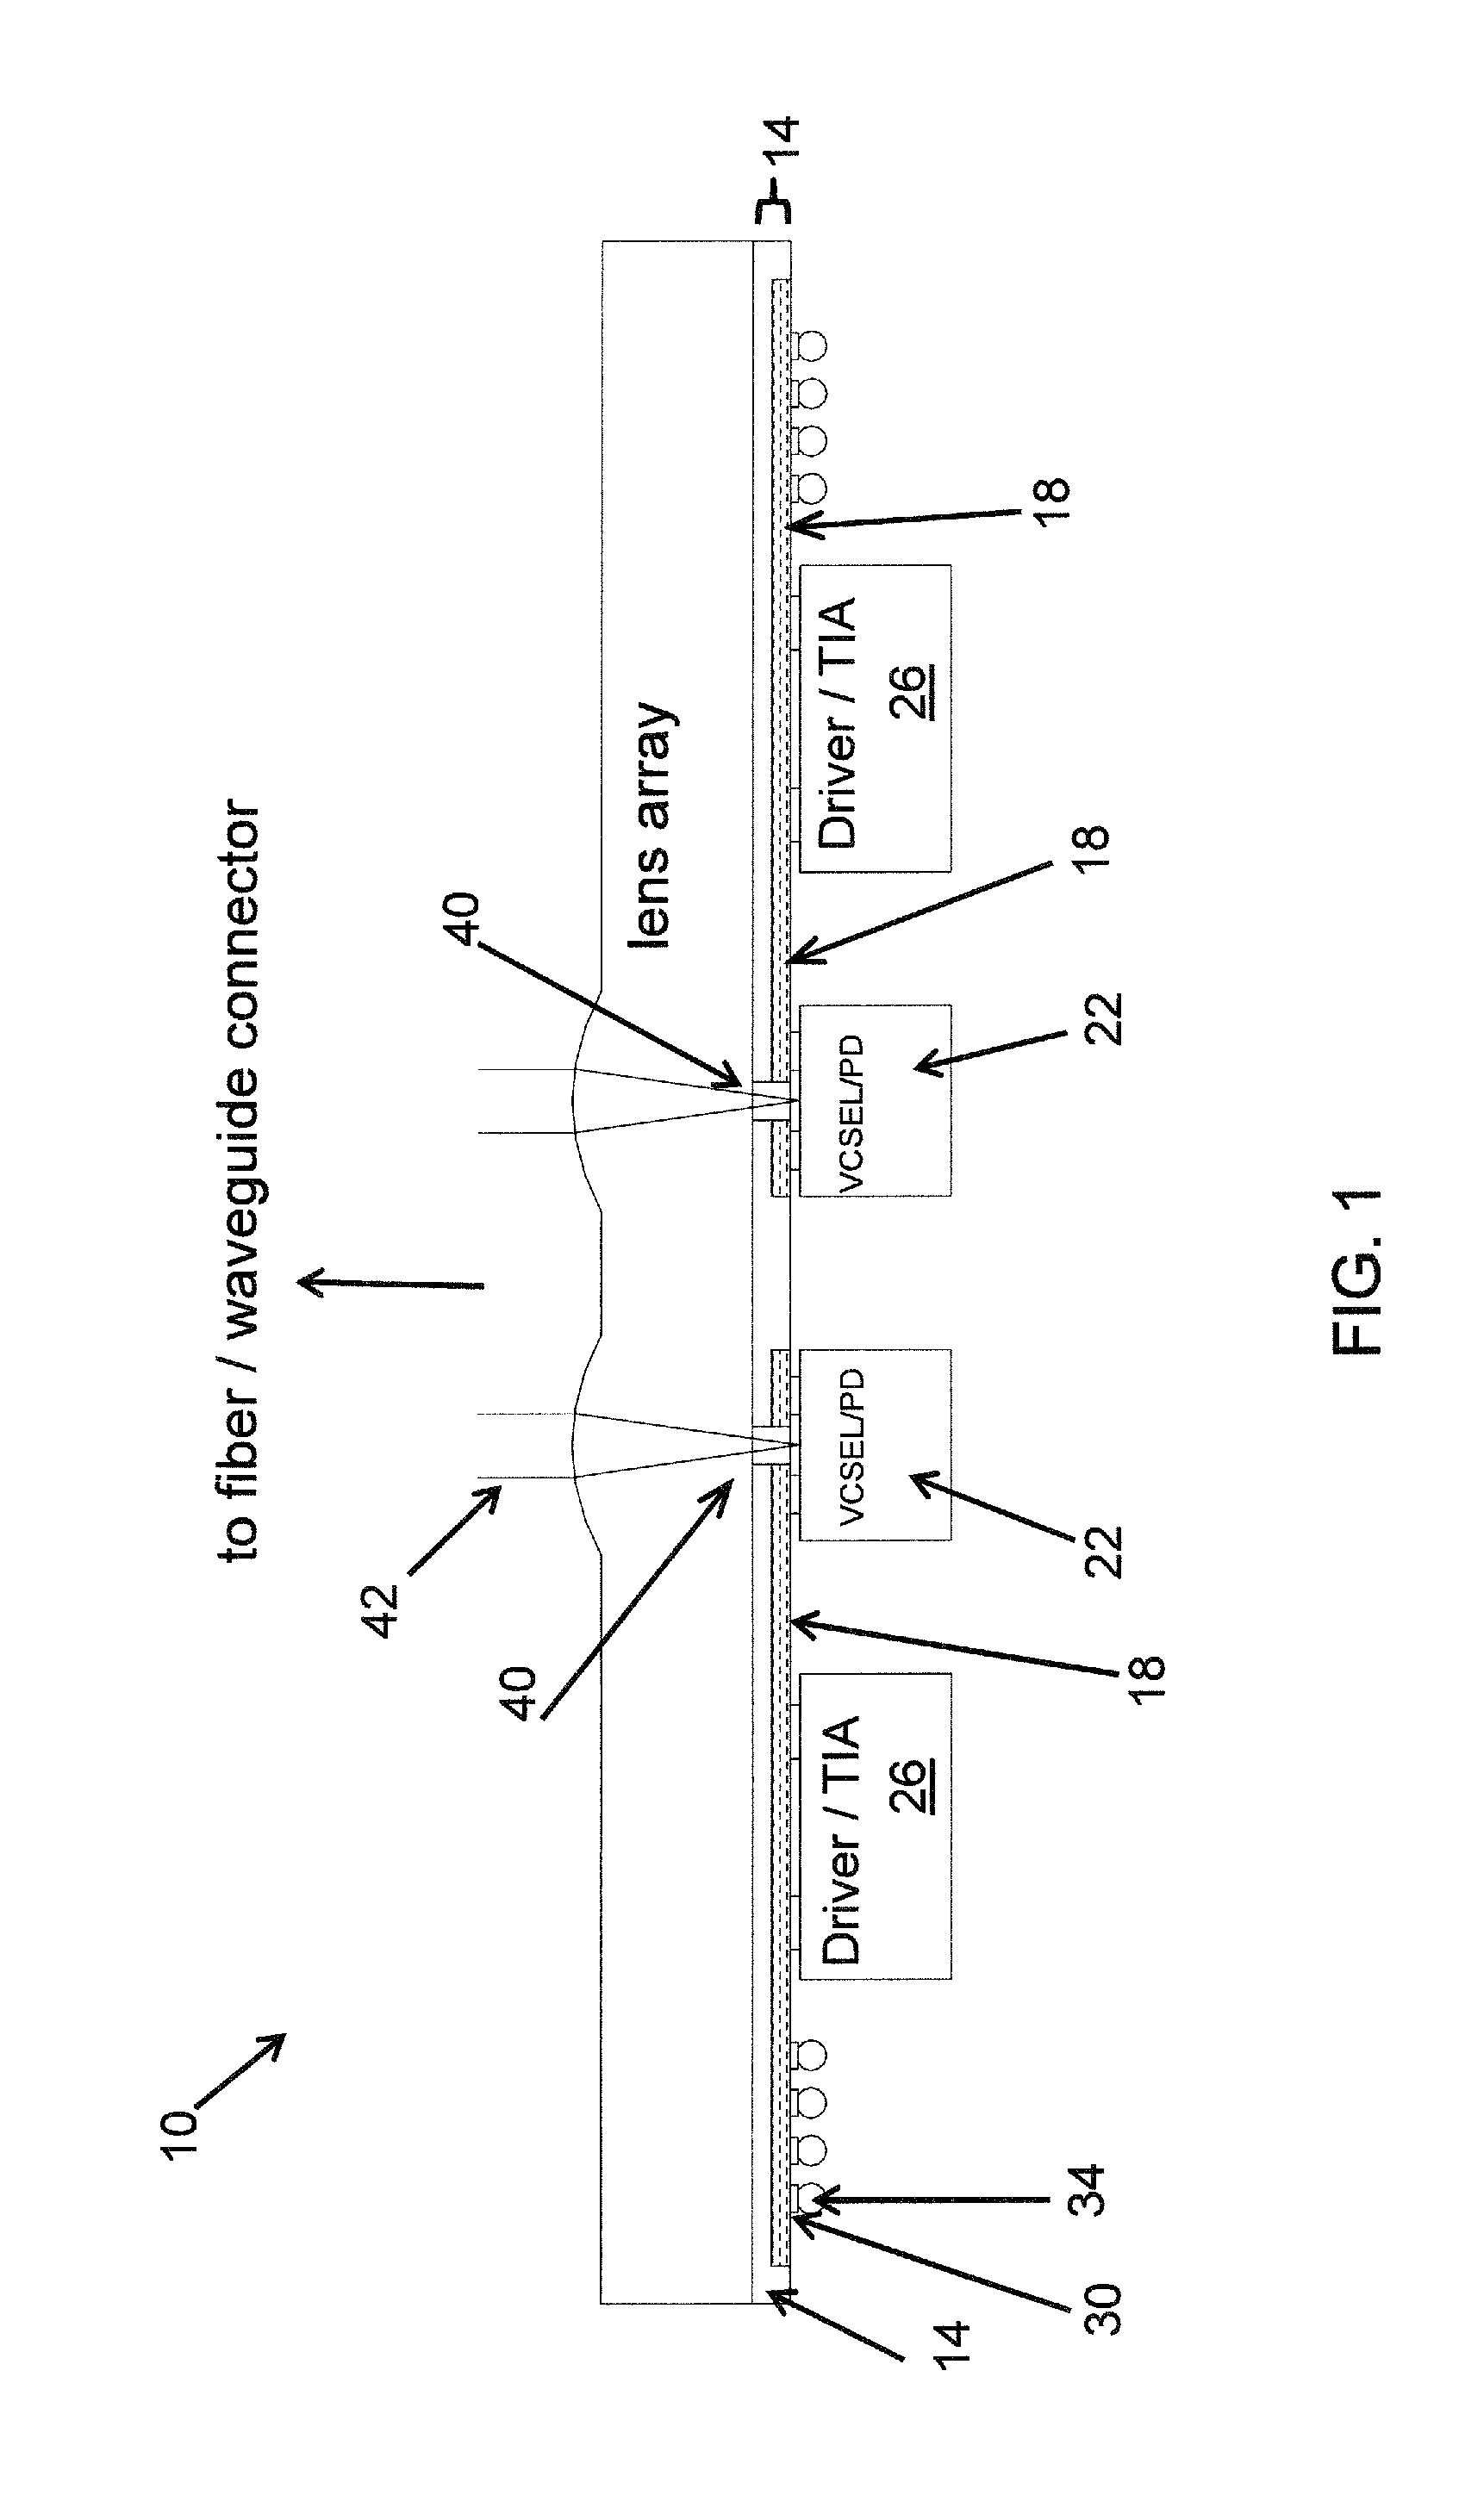 Silicon carrier optoelectronic packaging